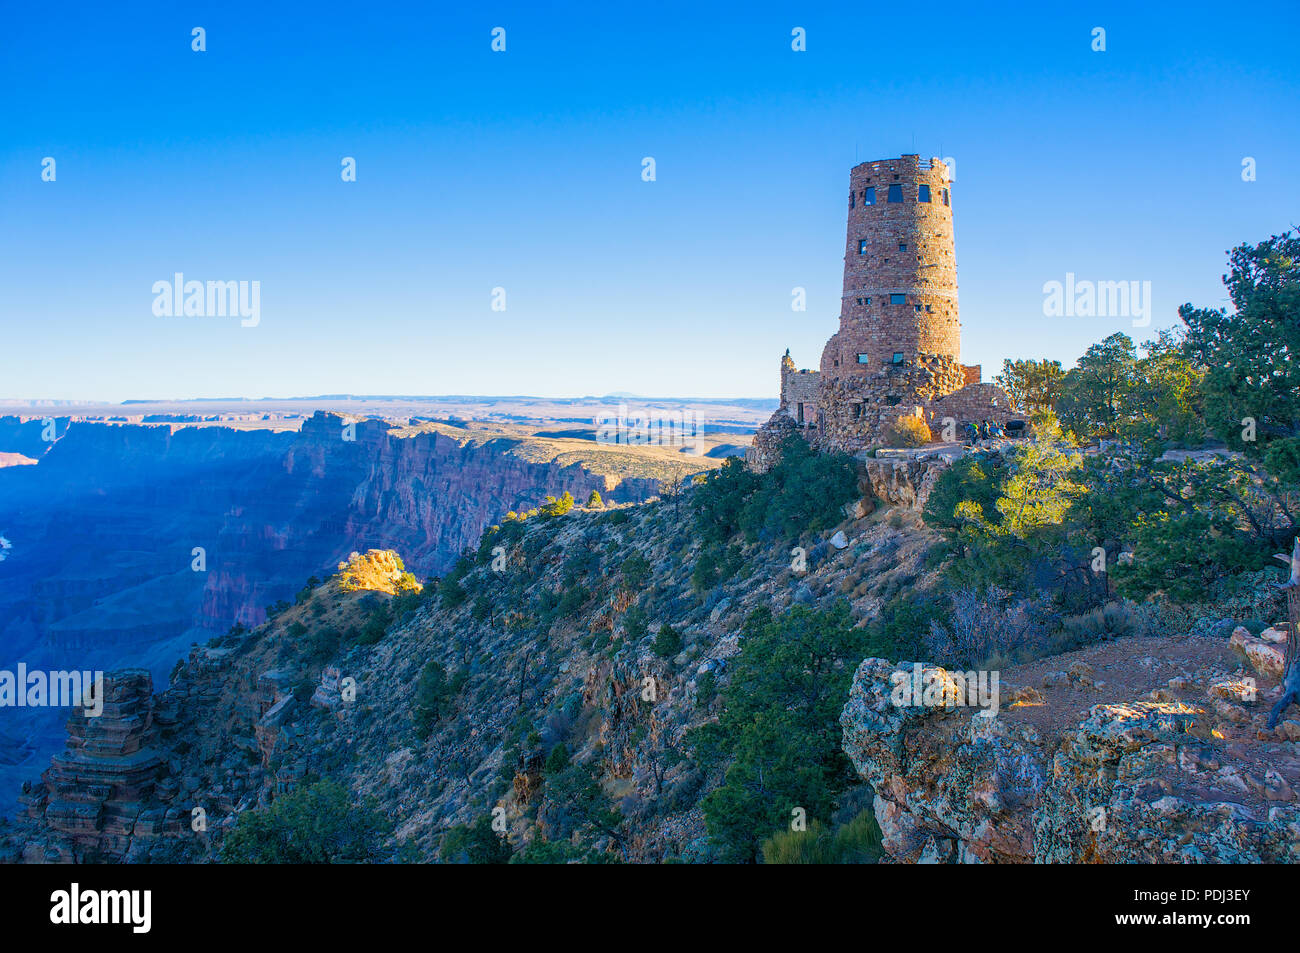 Tall stone watchtower stands guard on Grand Canyon Rim Stock Photo - Alamy